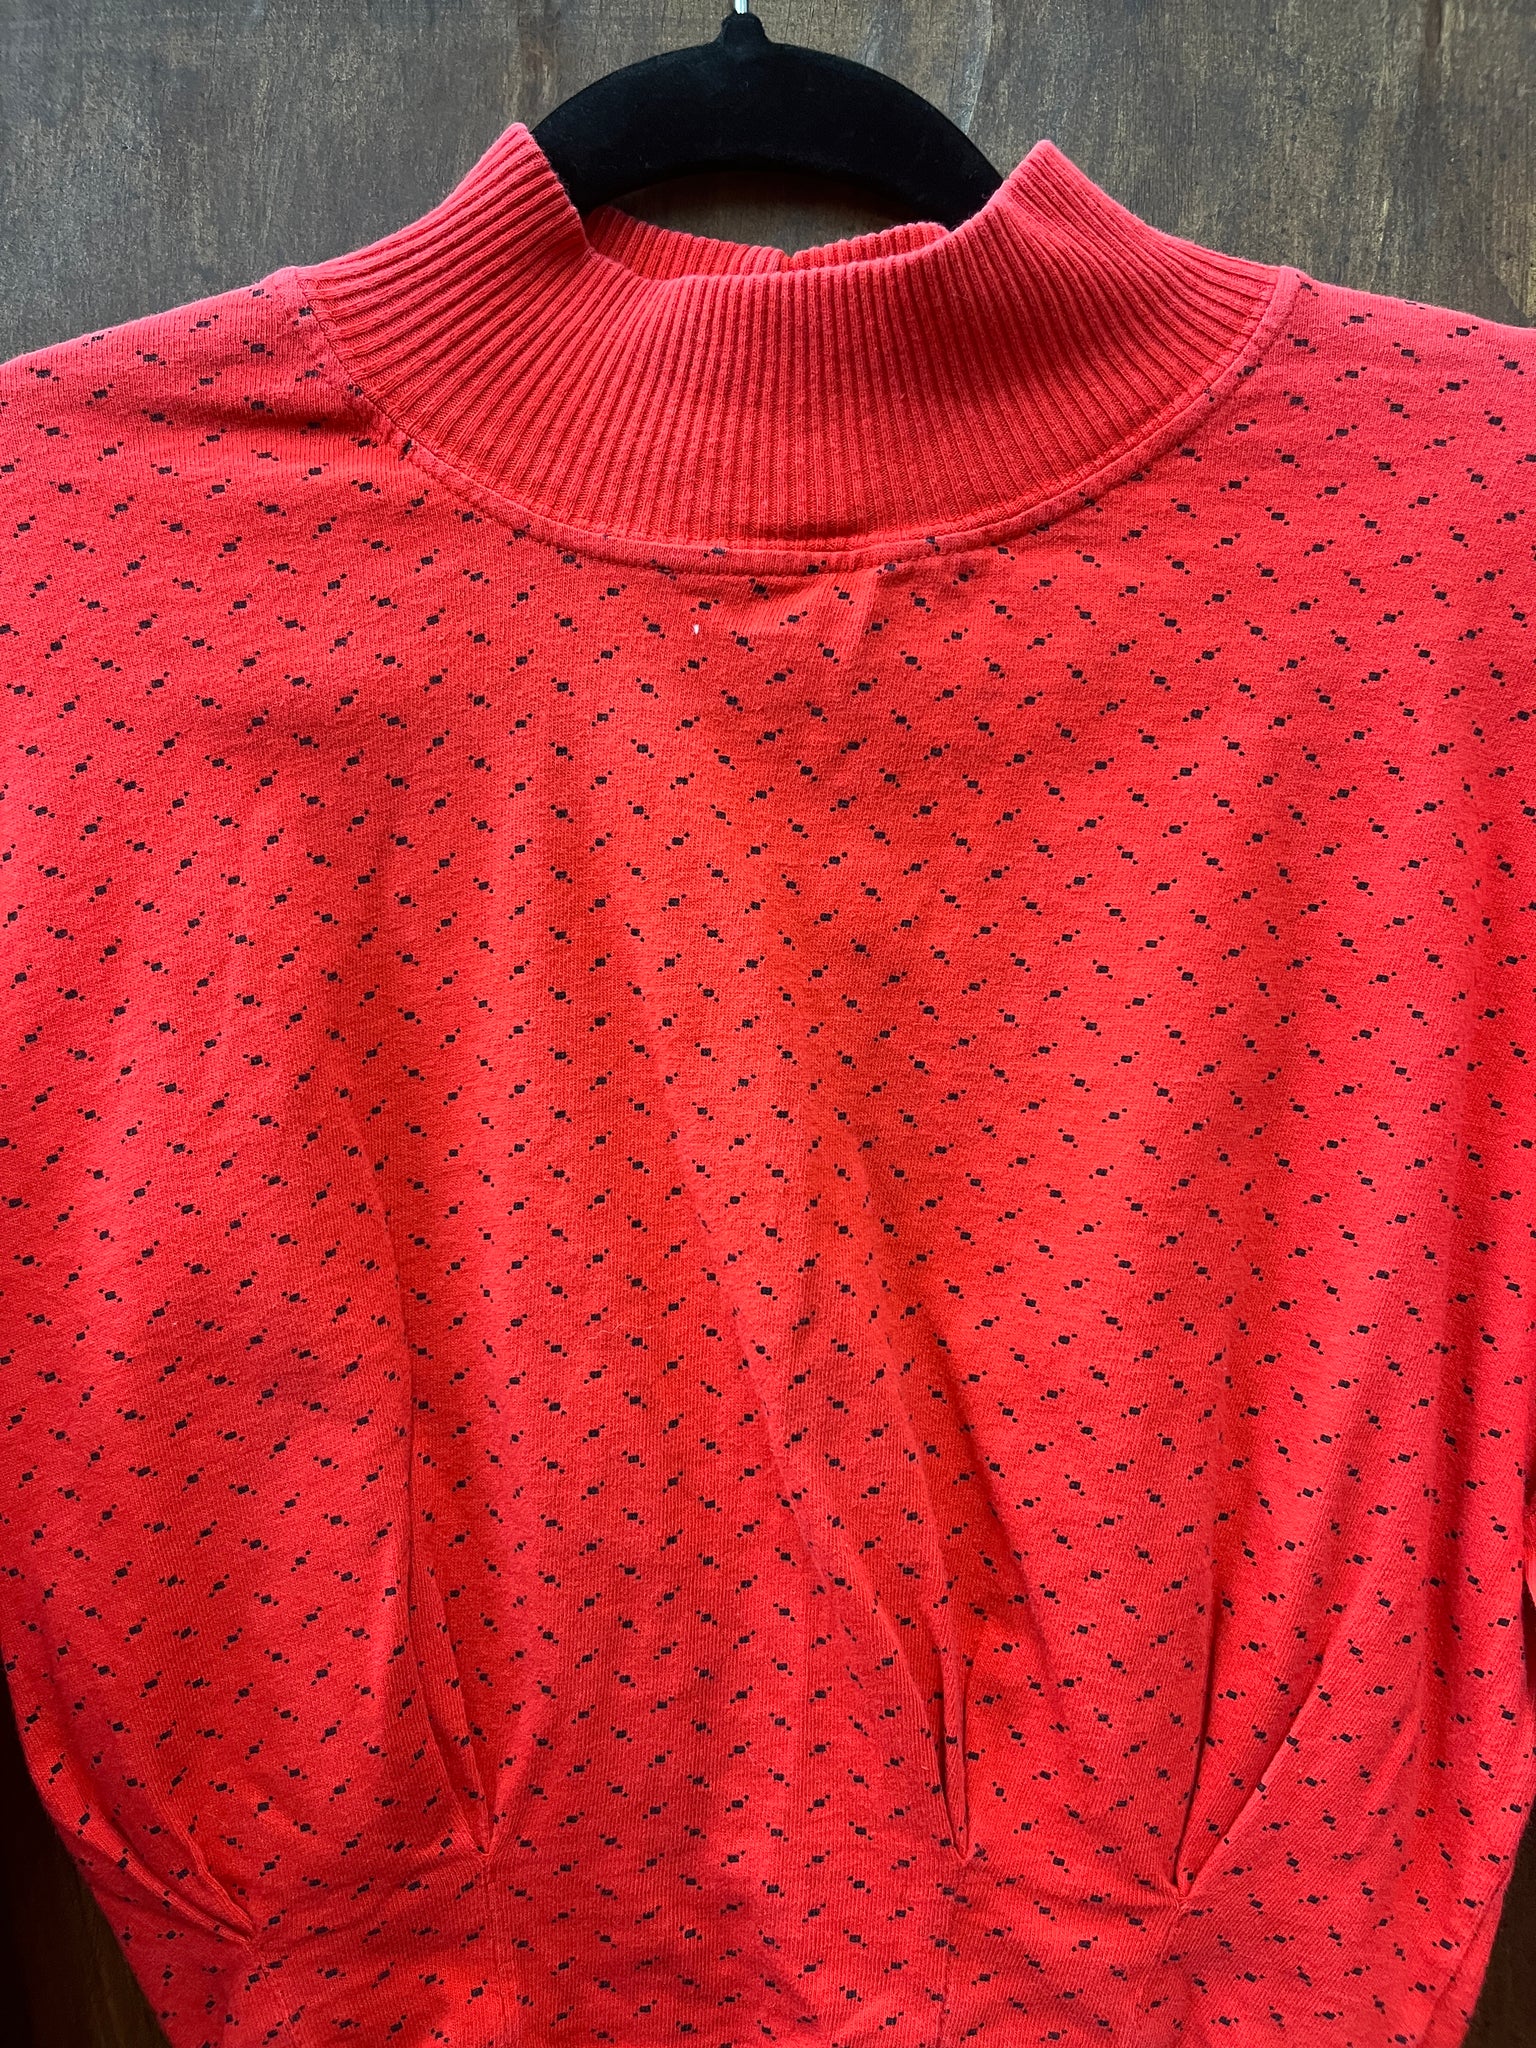 1990s T SHIRT- Cherrylane- red with black ditty cropped mock turtleneck